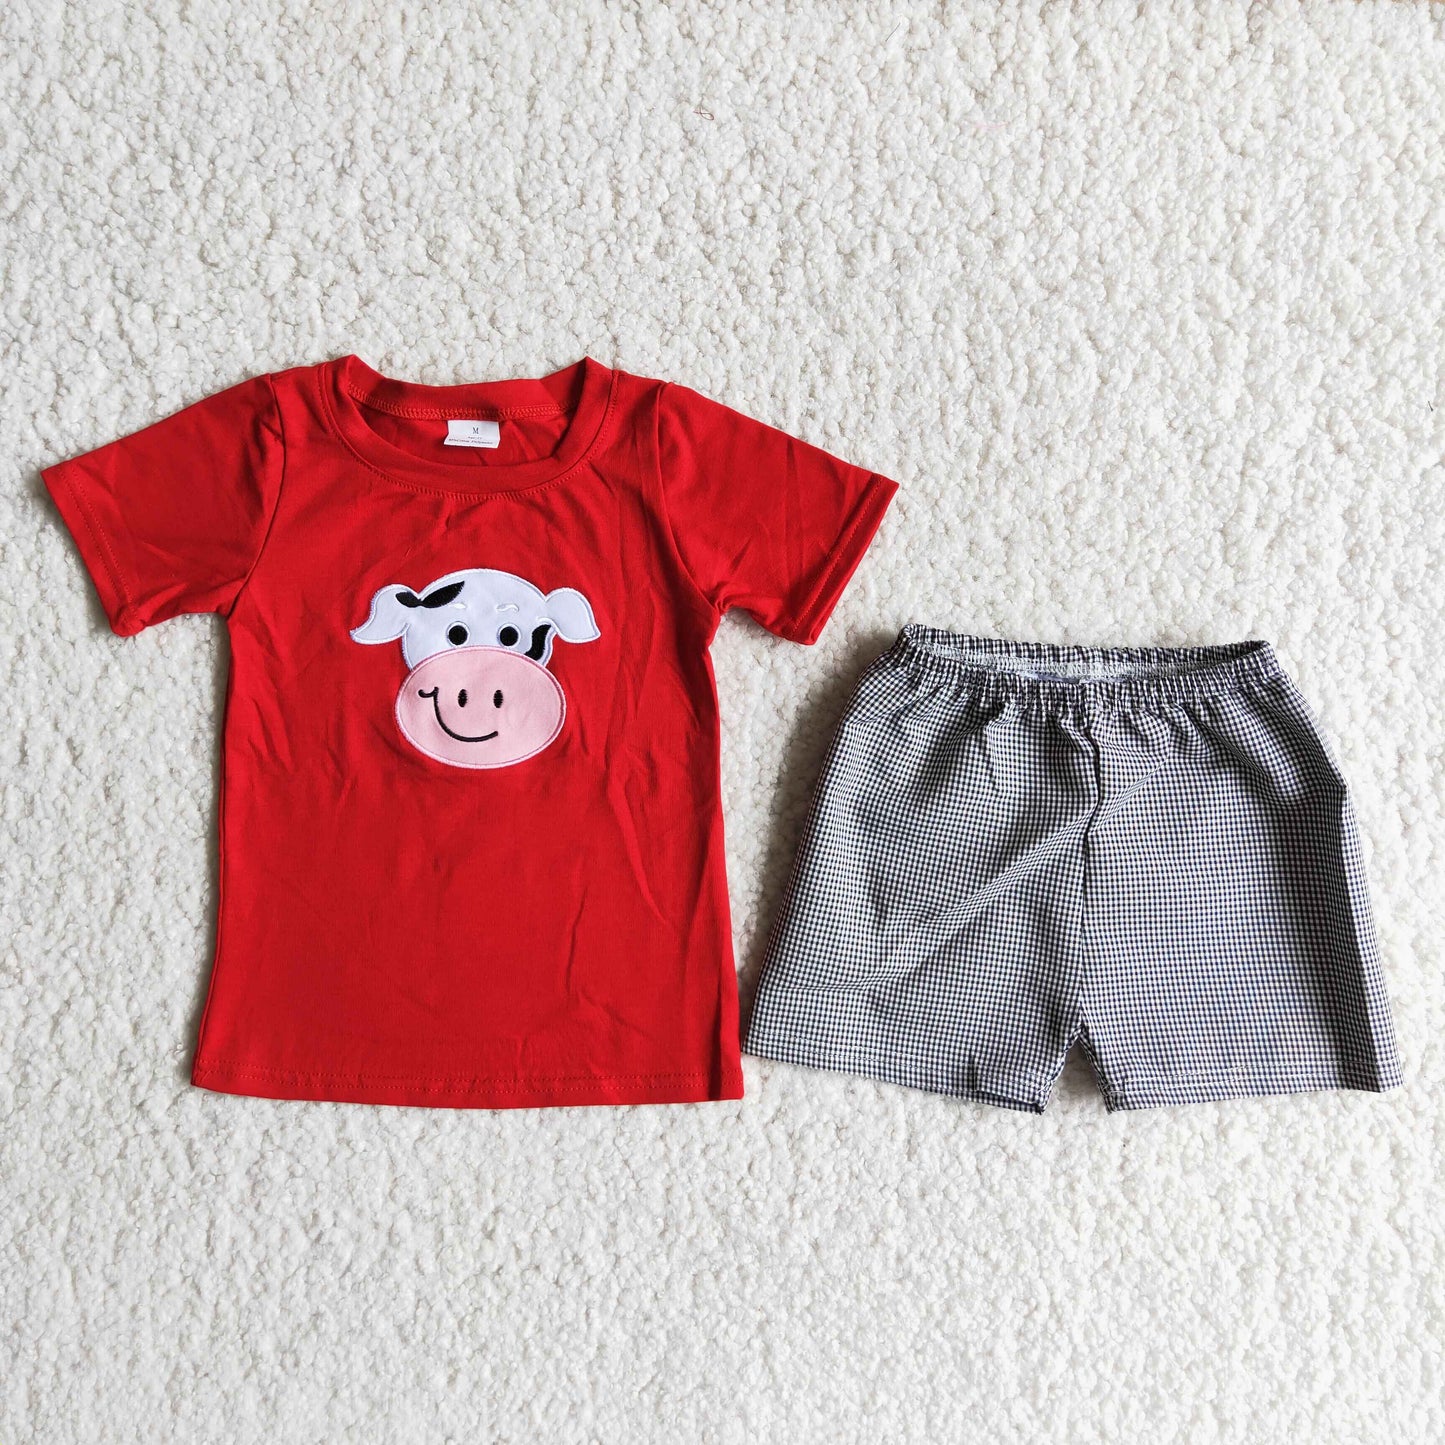 Cow embroidery shirt woven shorts boy outfit